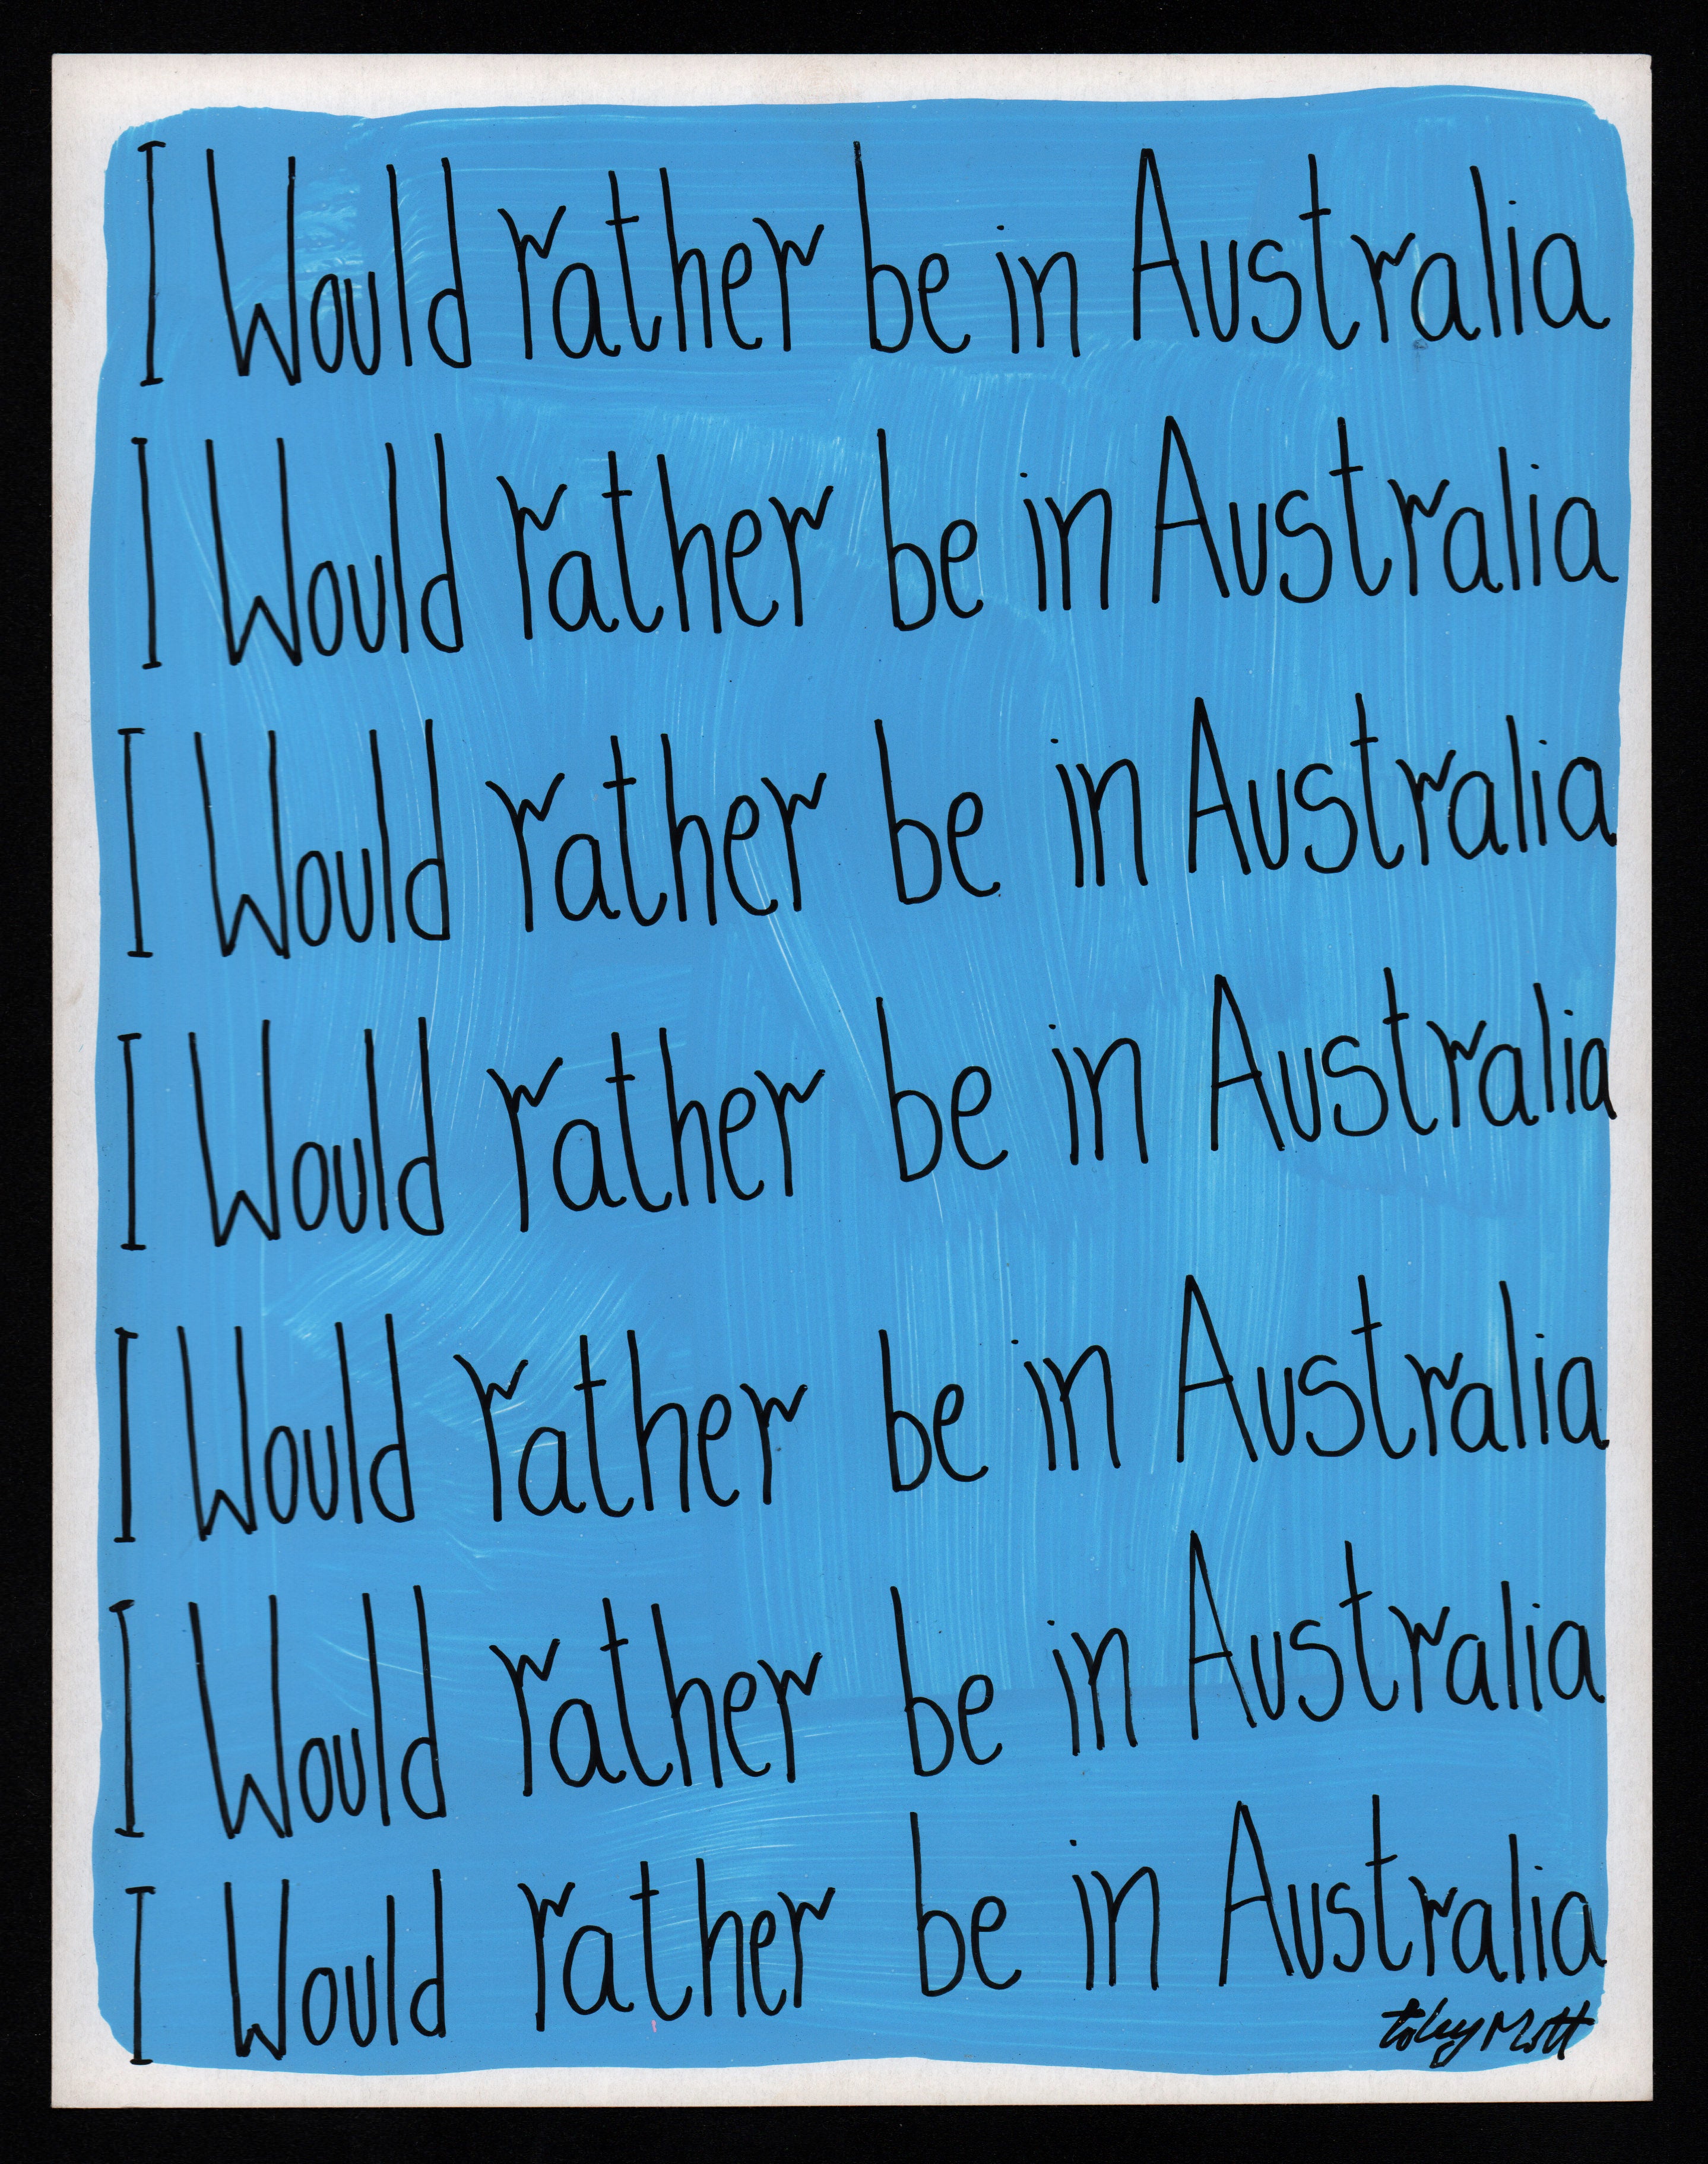 I would rather be in Australia